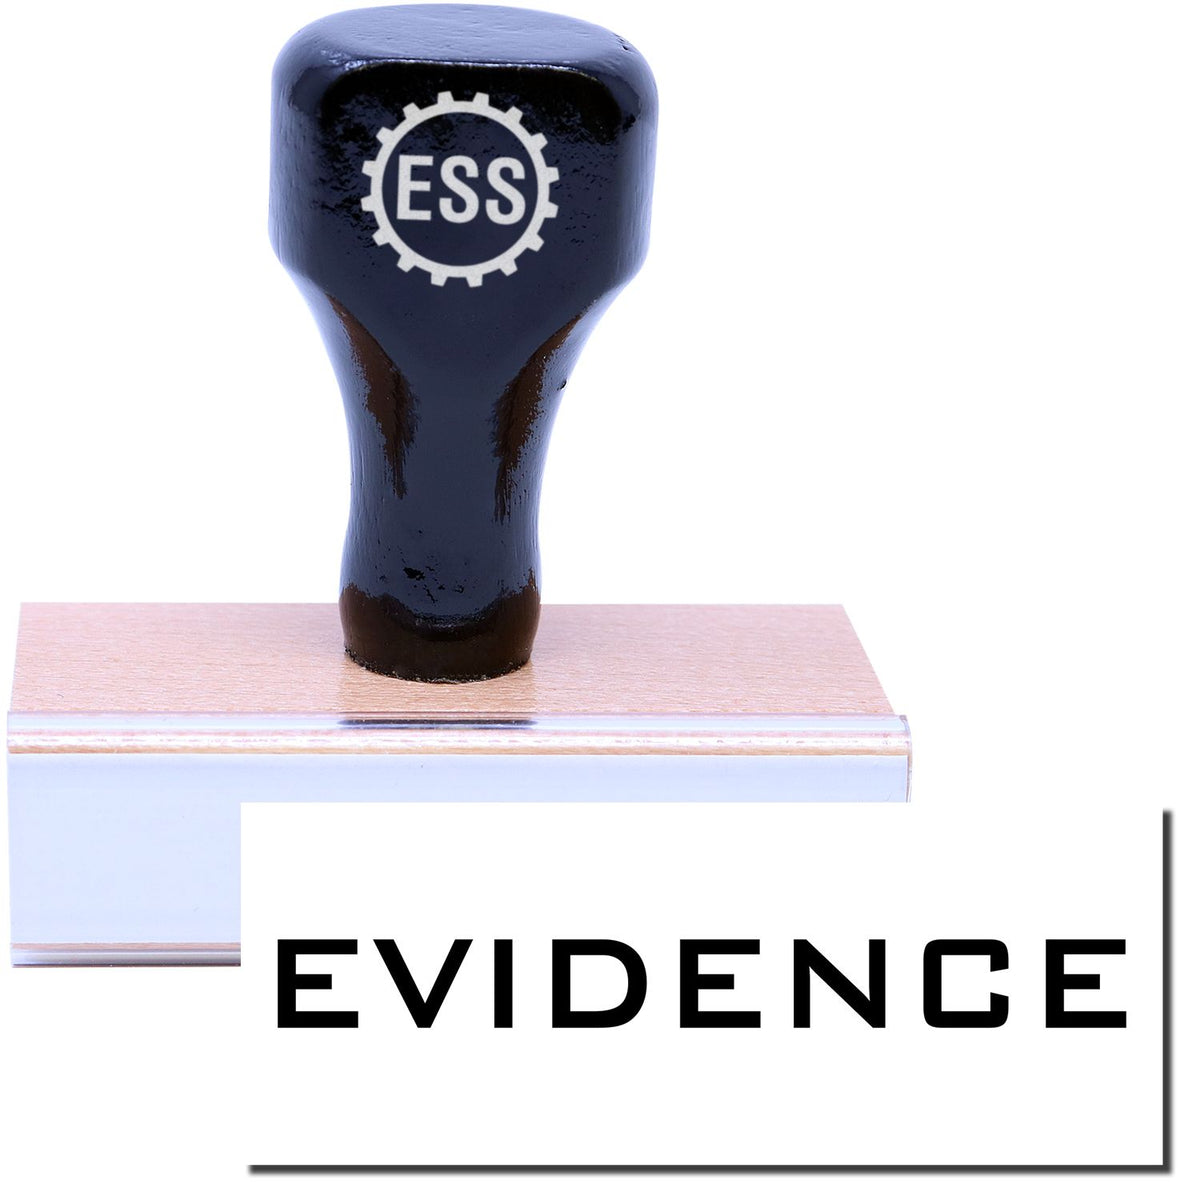 A stock office rubber stamp with a stamped image showing how the text &quot;EVIDENCE&quot; in a large font is displayed after stamping.